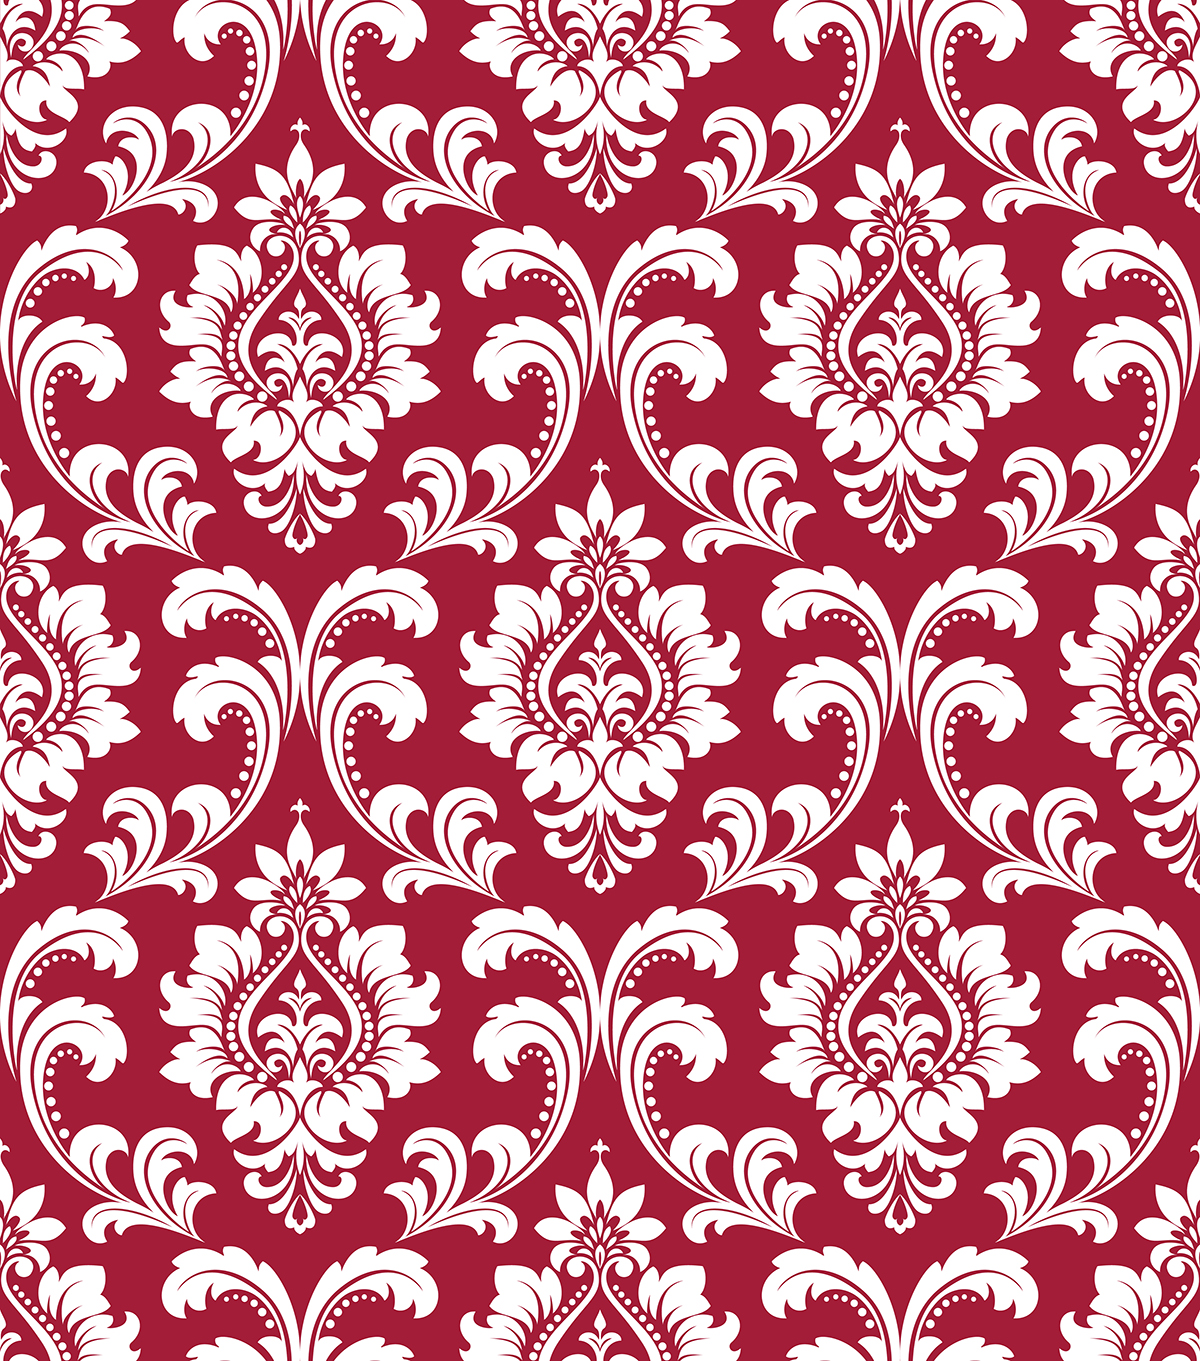 Red wallpaper designs for Walls